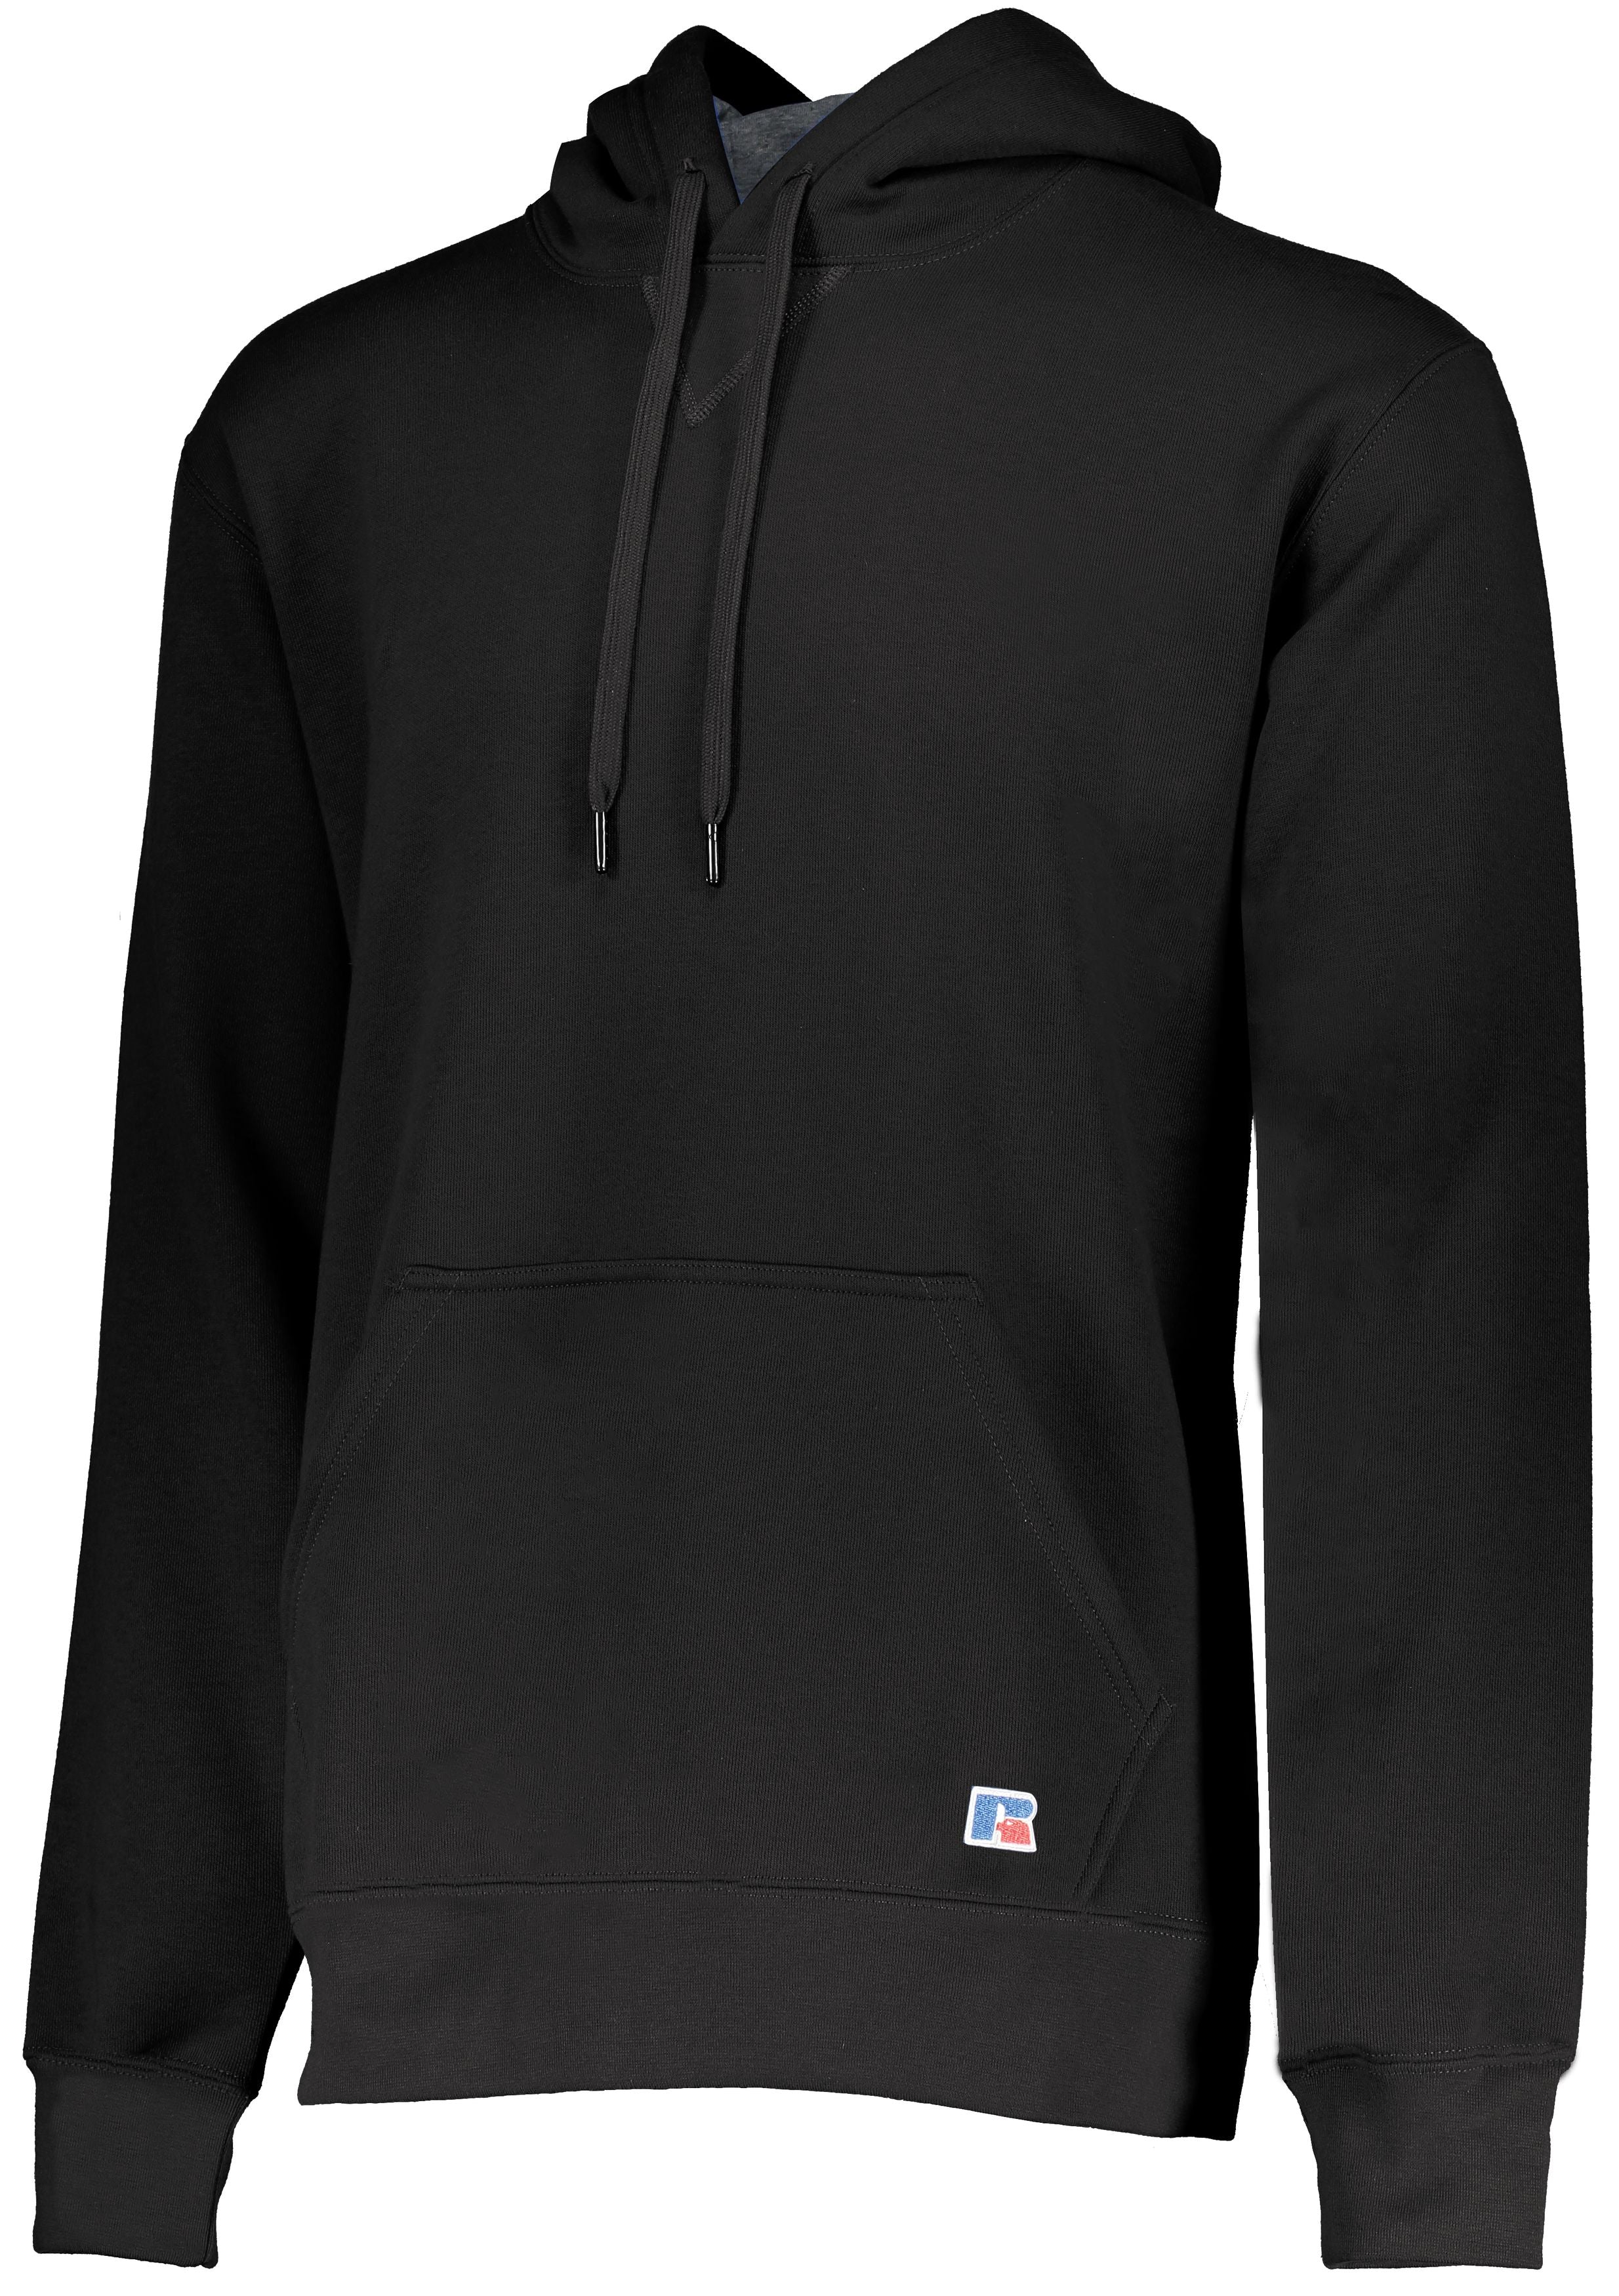 Russell Athletic 80/20 Fleece Hoodie in Black  -Part of the Adult, Russell-Athletic-Products, Shirts product lines at KanaleyCreations.com